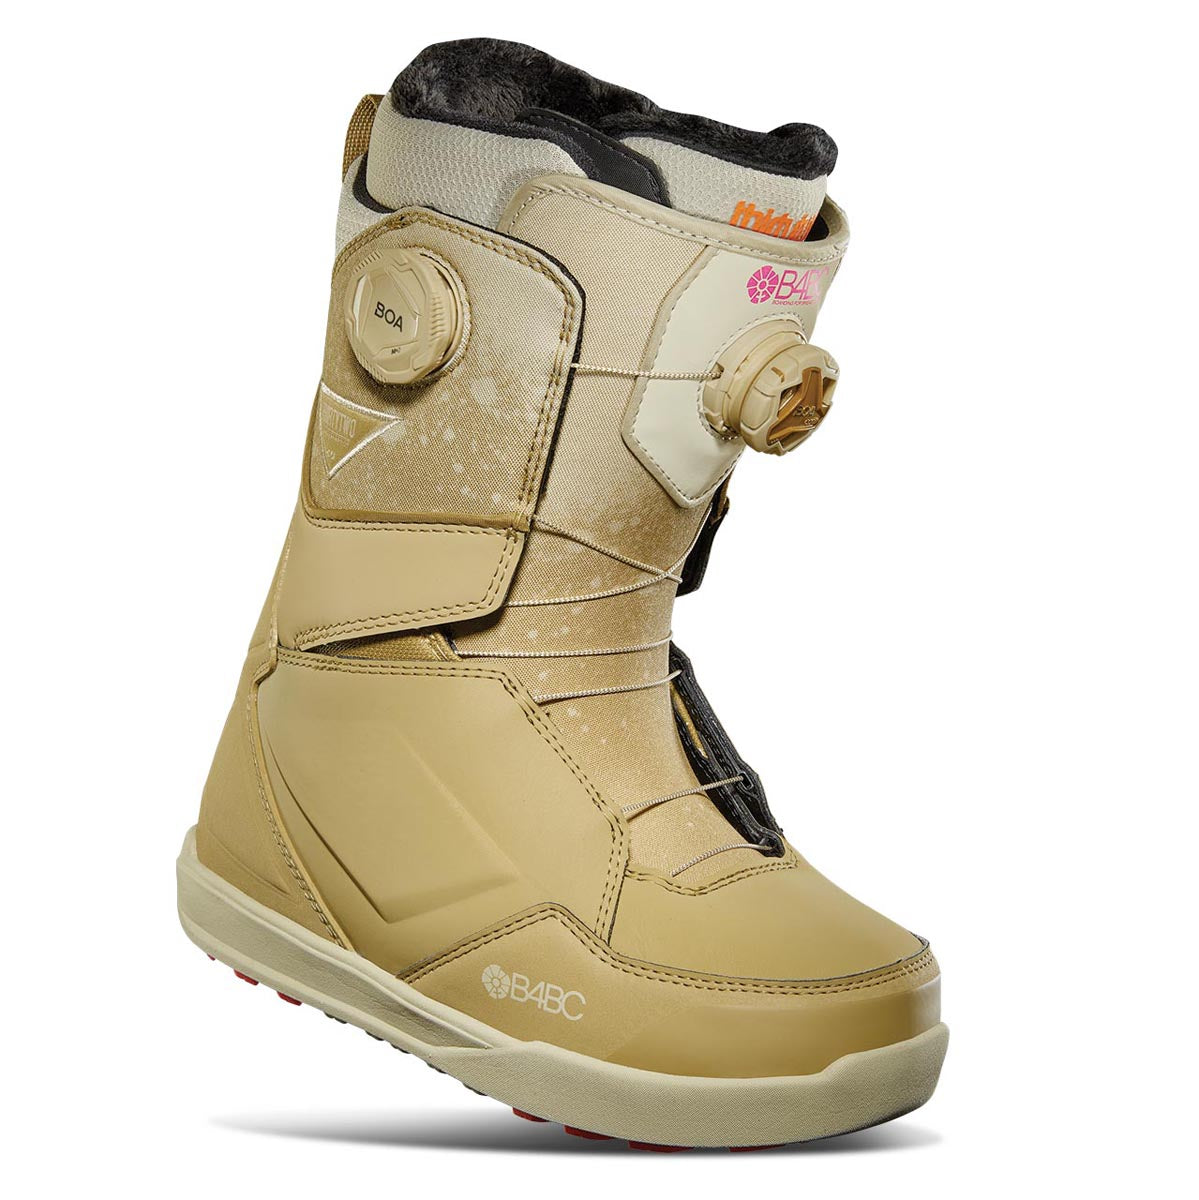 Thirty Two Womens Lashed Double Boa B4bc 2024 Snowboard Boots - Tan image 1